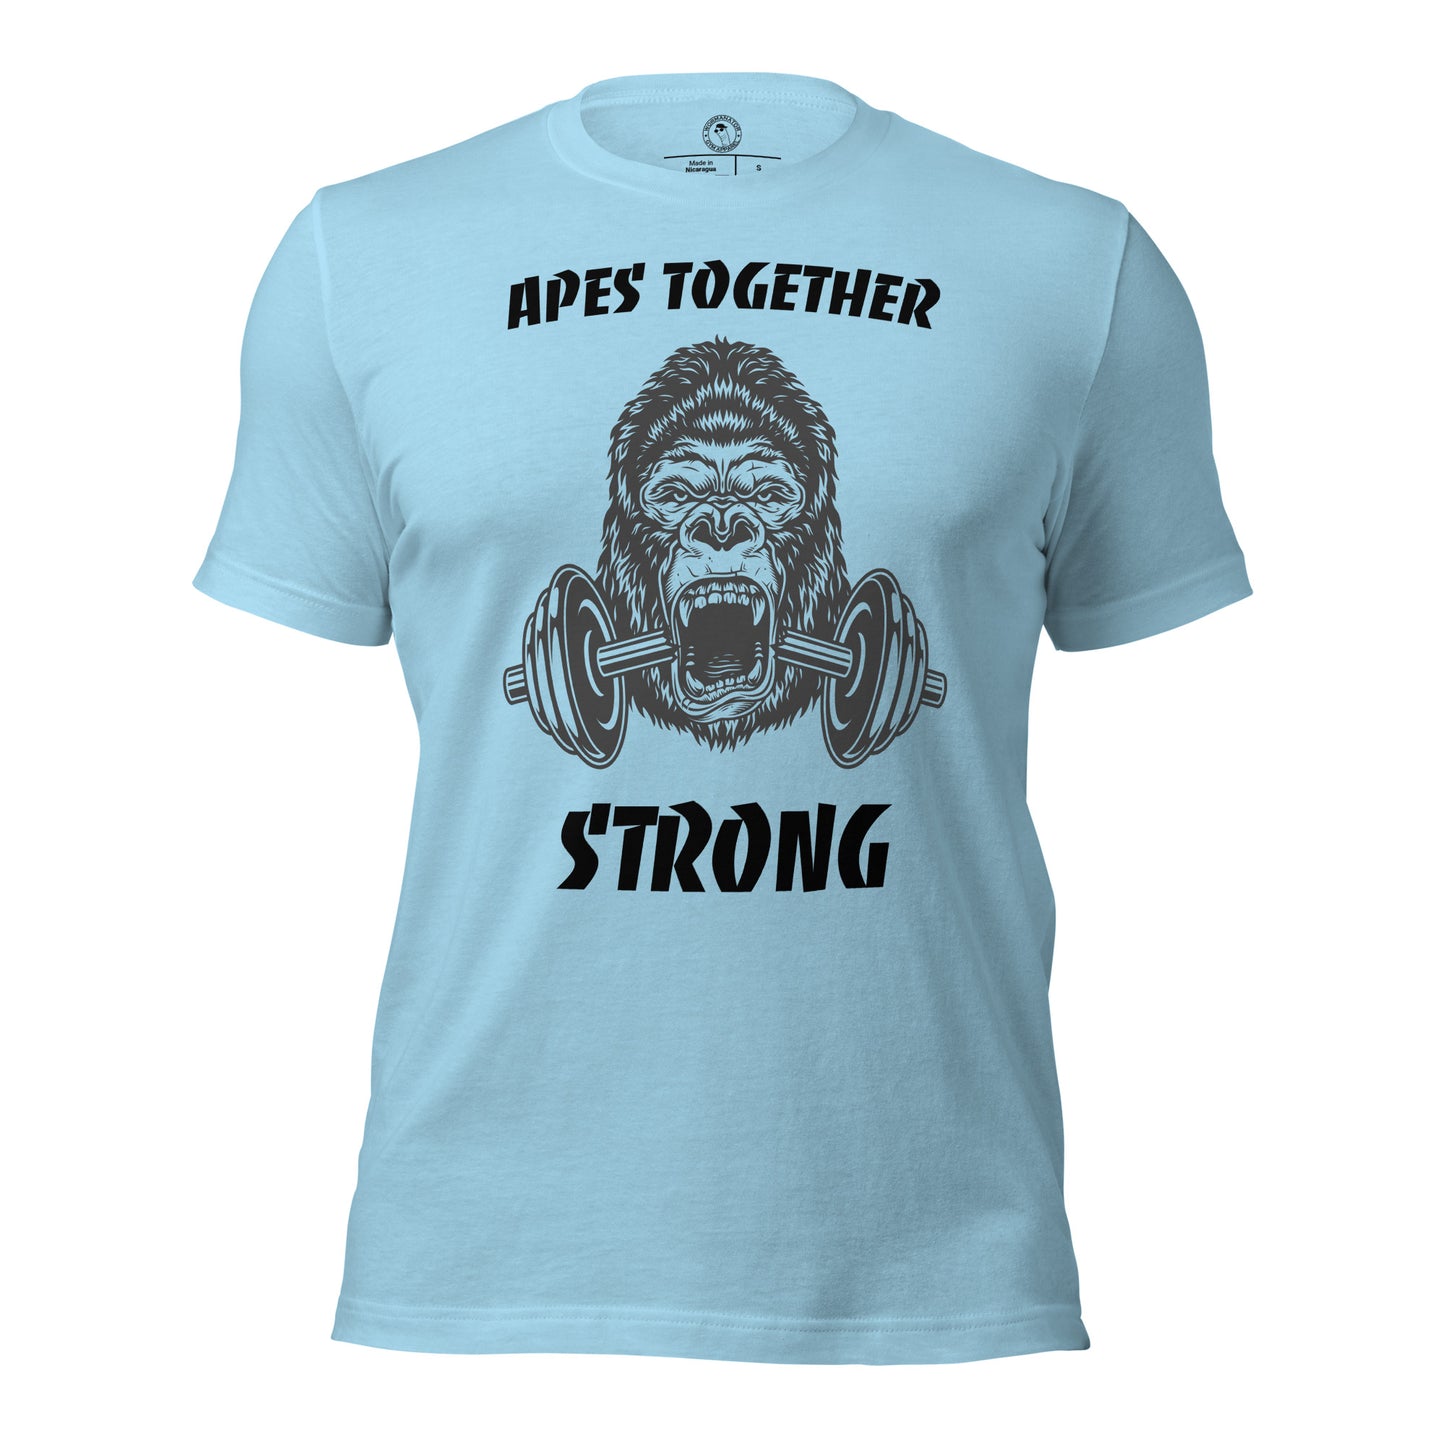 Apes Together Strong Shirt in Ocean Blue